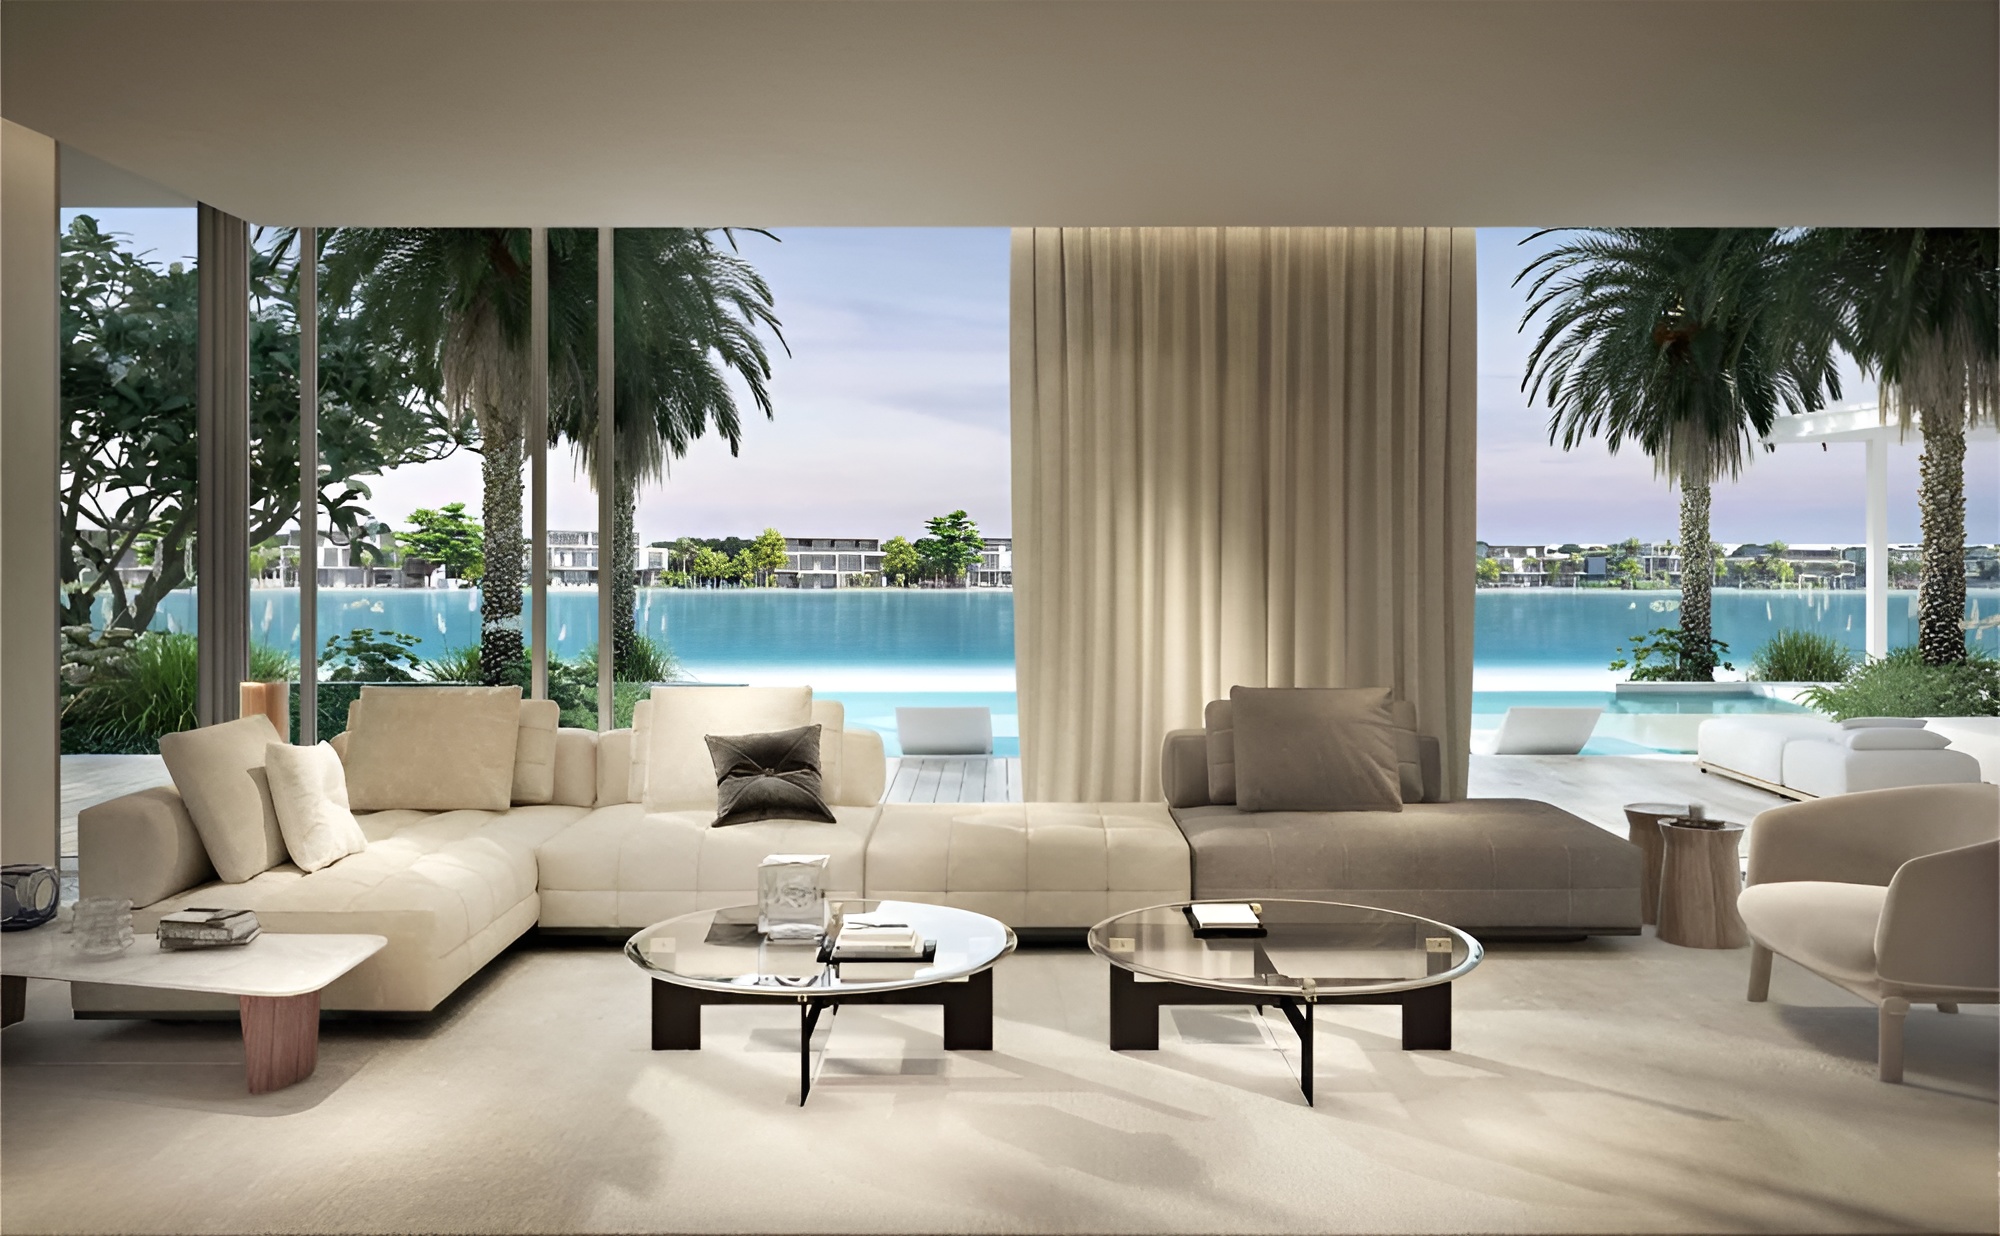 The Coral Collection Palm View Villas at Jebel Ali